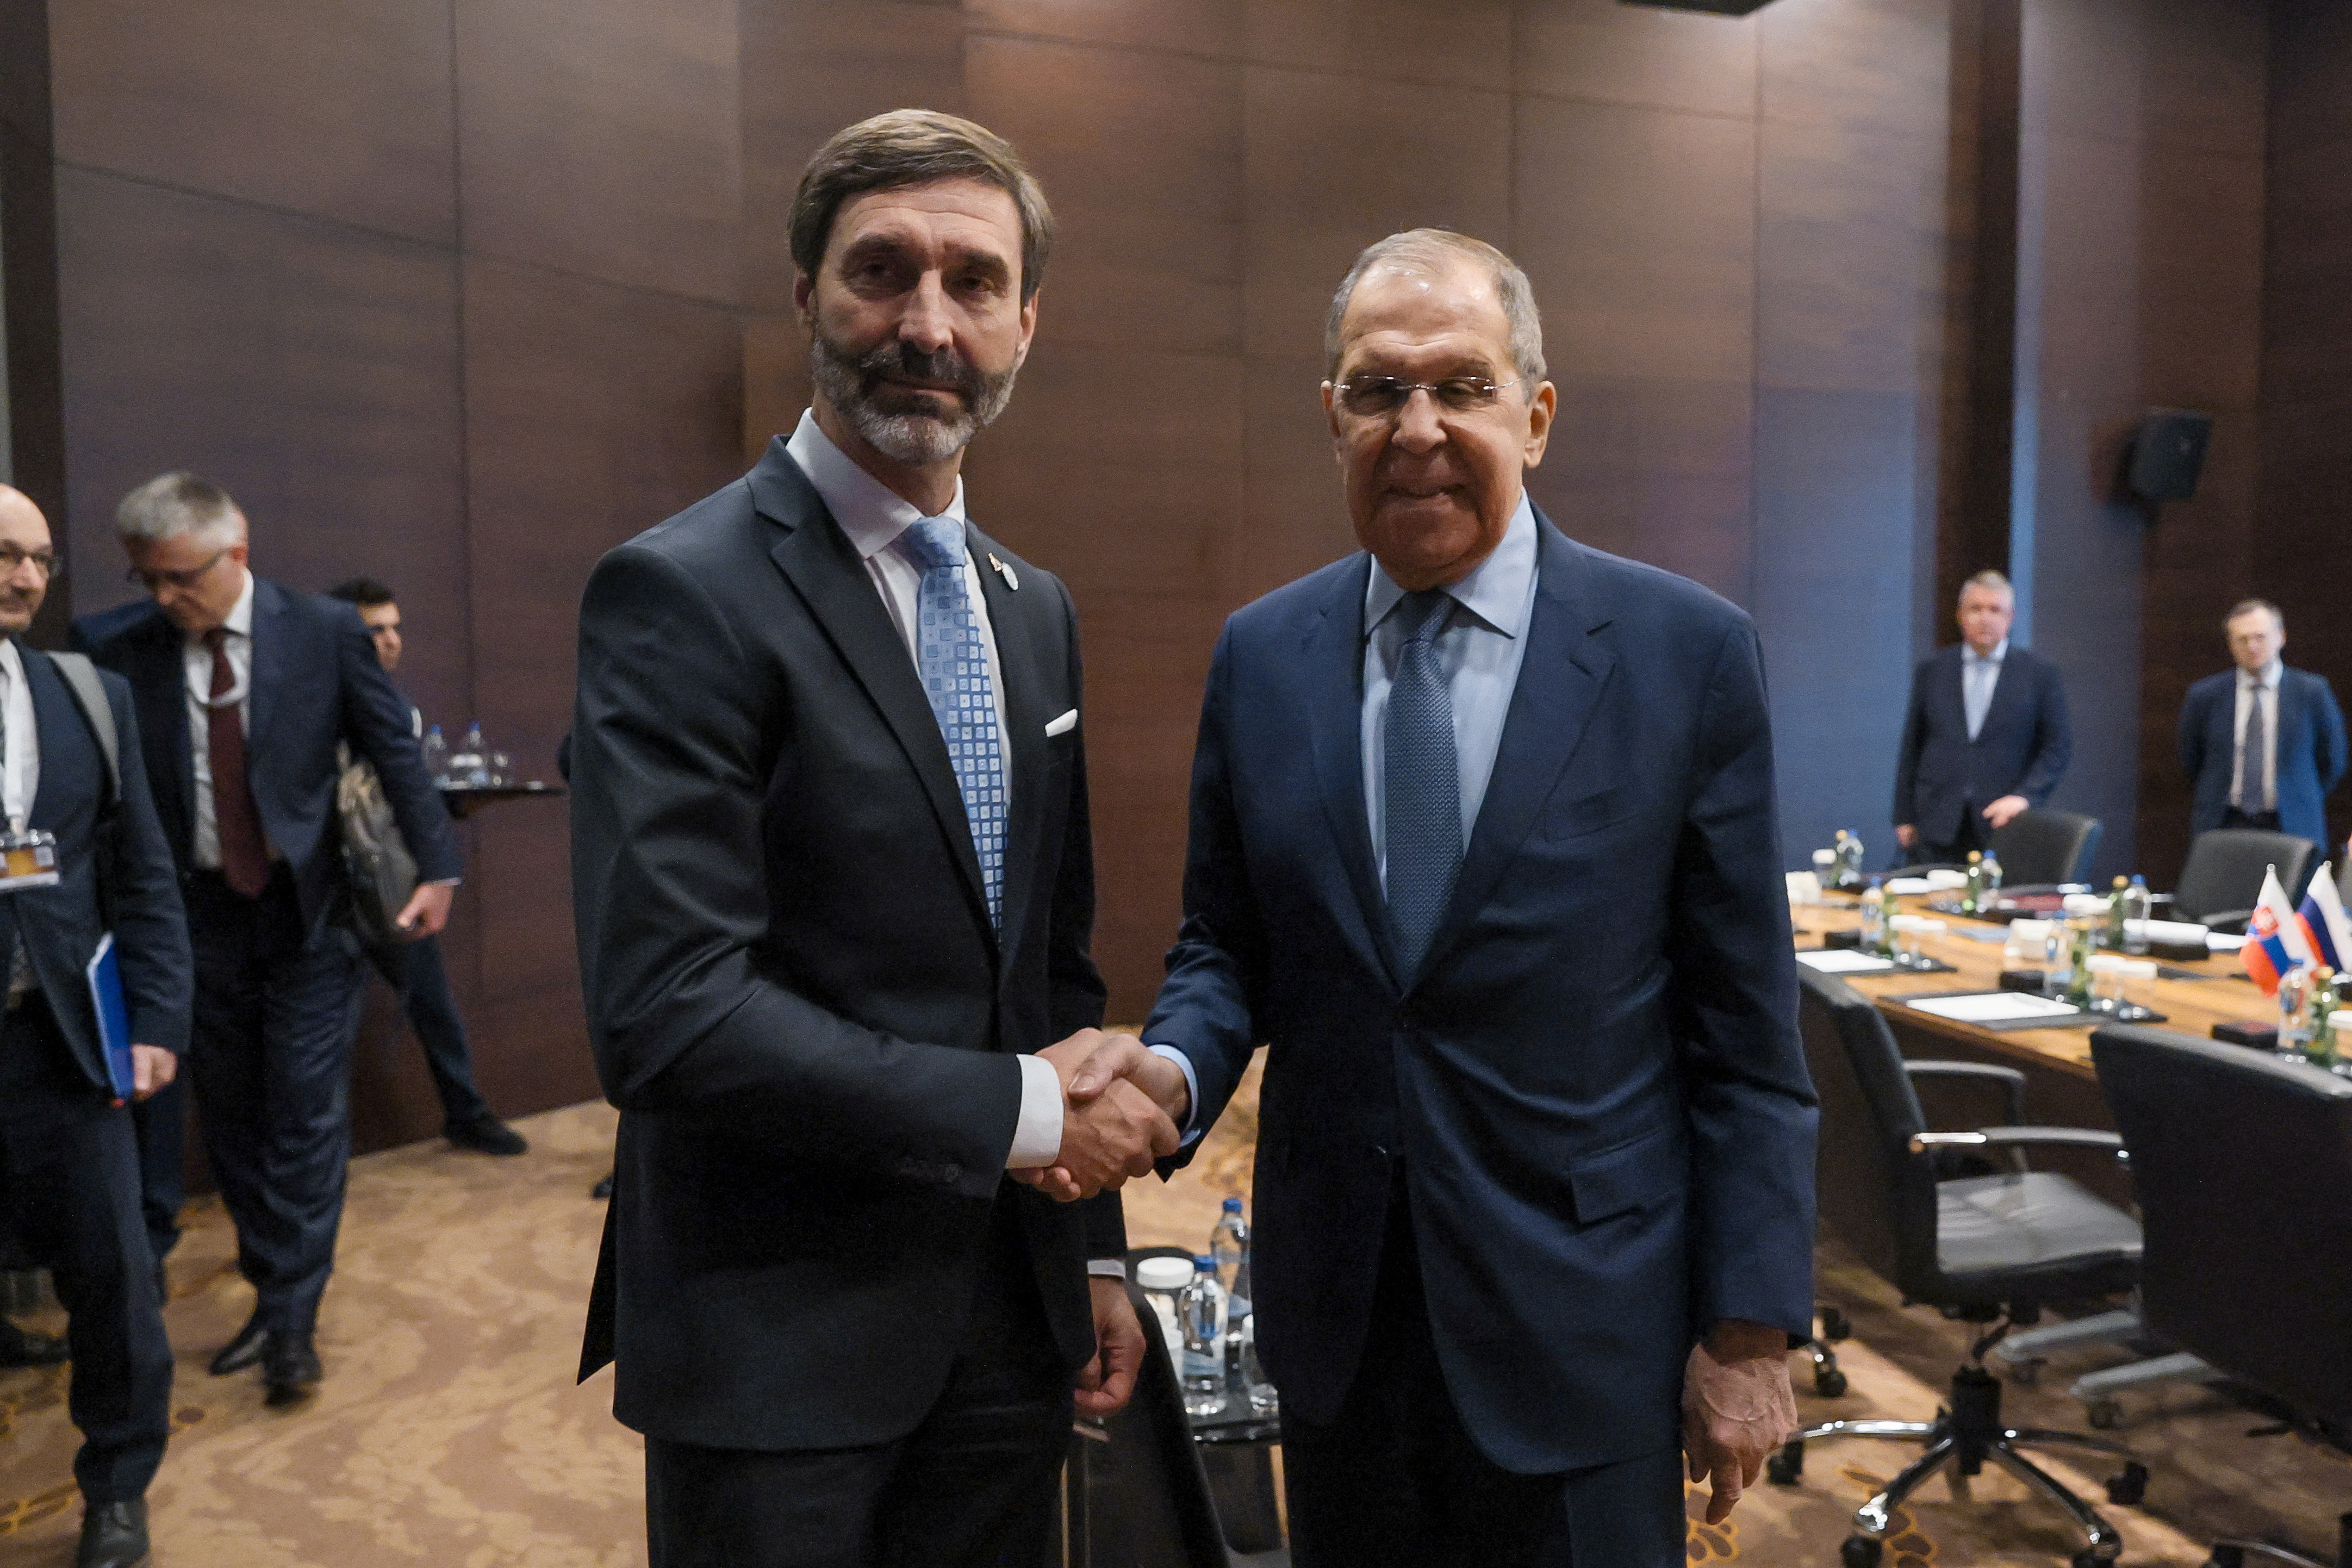 Russia's Foreign Minister Lavrov meets Slovakia's Foreign Minister Blanar in Antalya